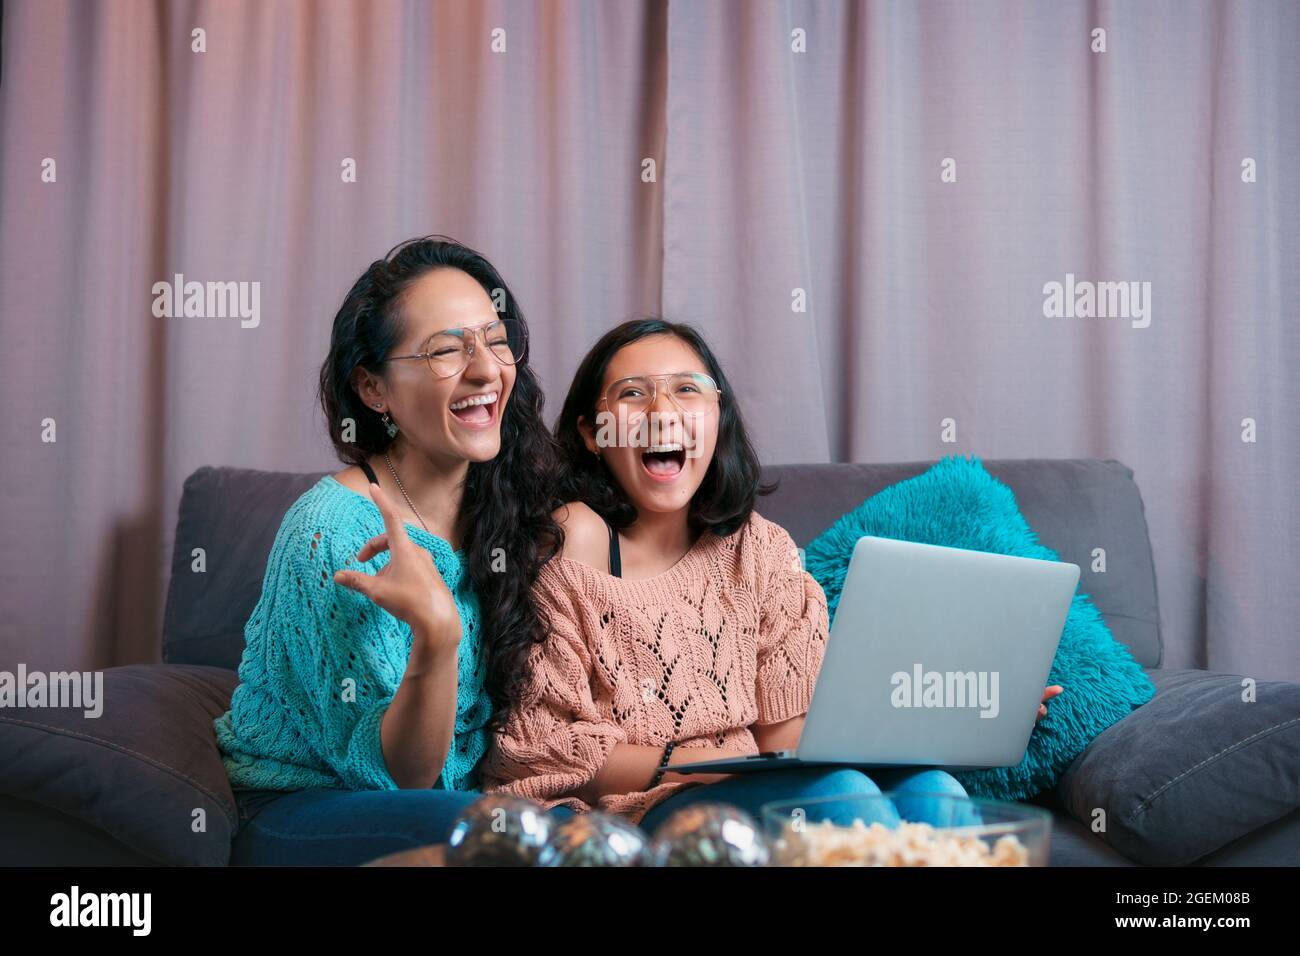 Horizontal view of a mom and daughter using a laptop, both laughing out loud at what they have seen on the computer screen Stock Photo